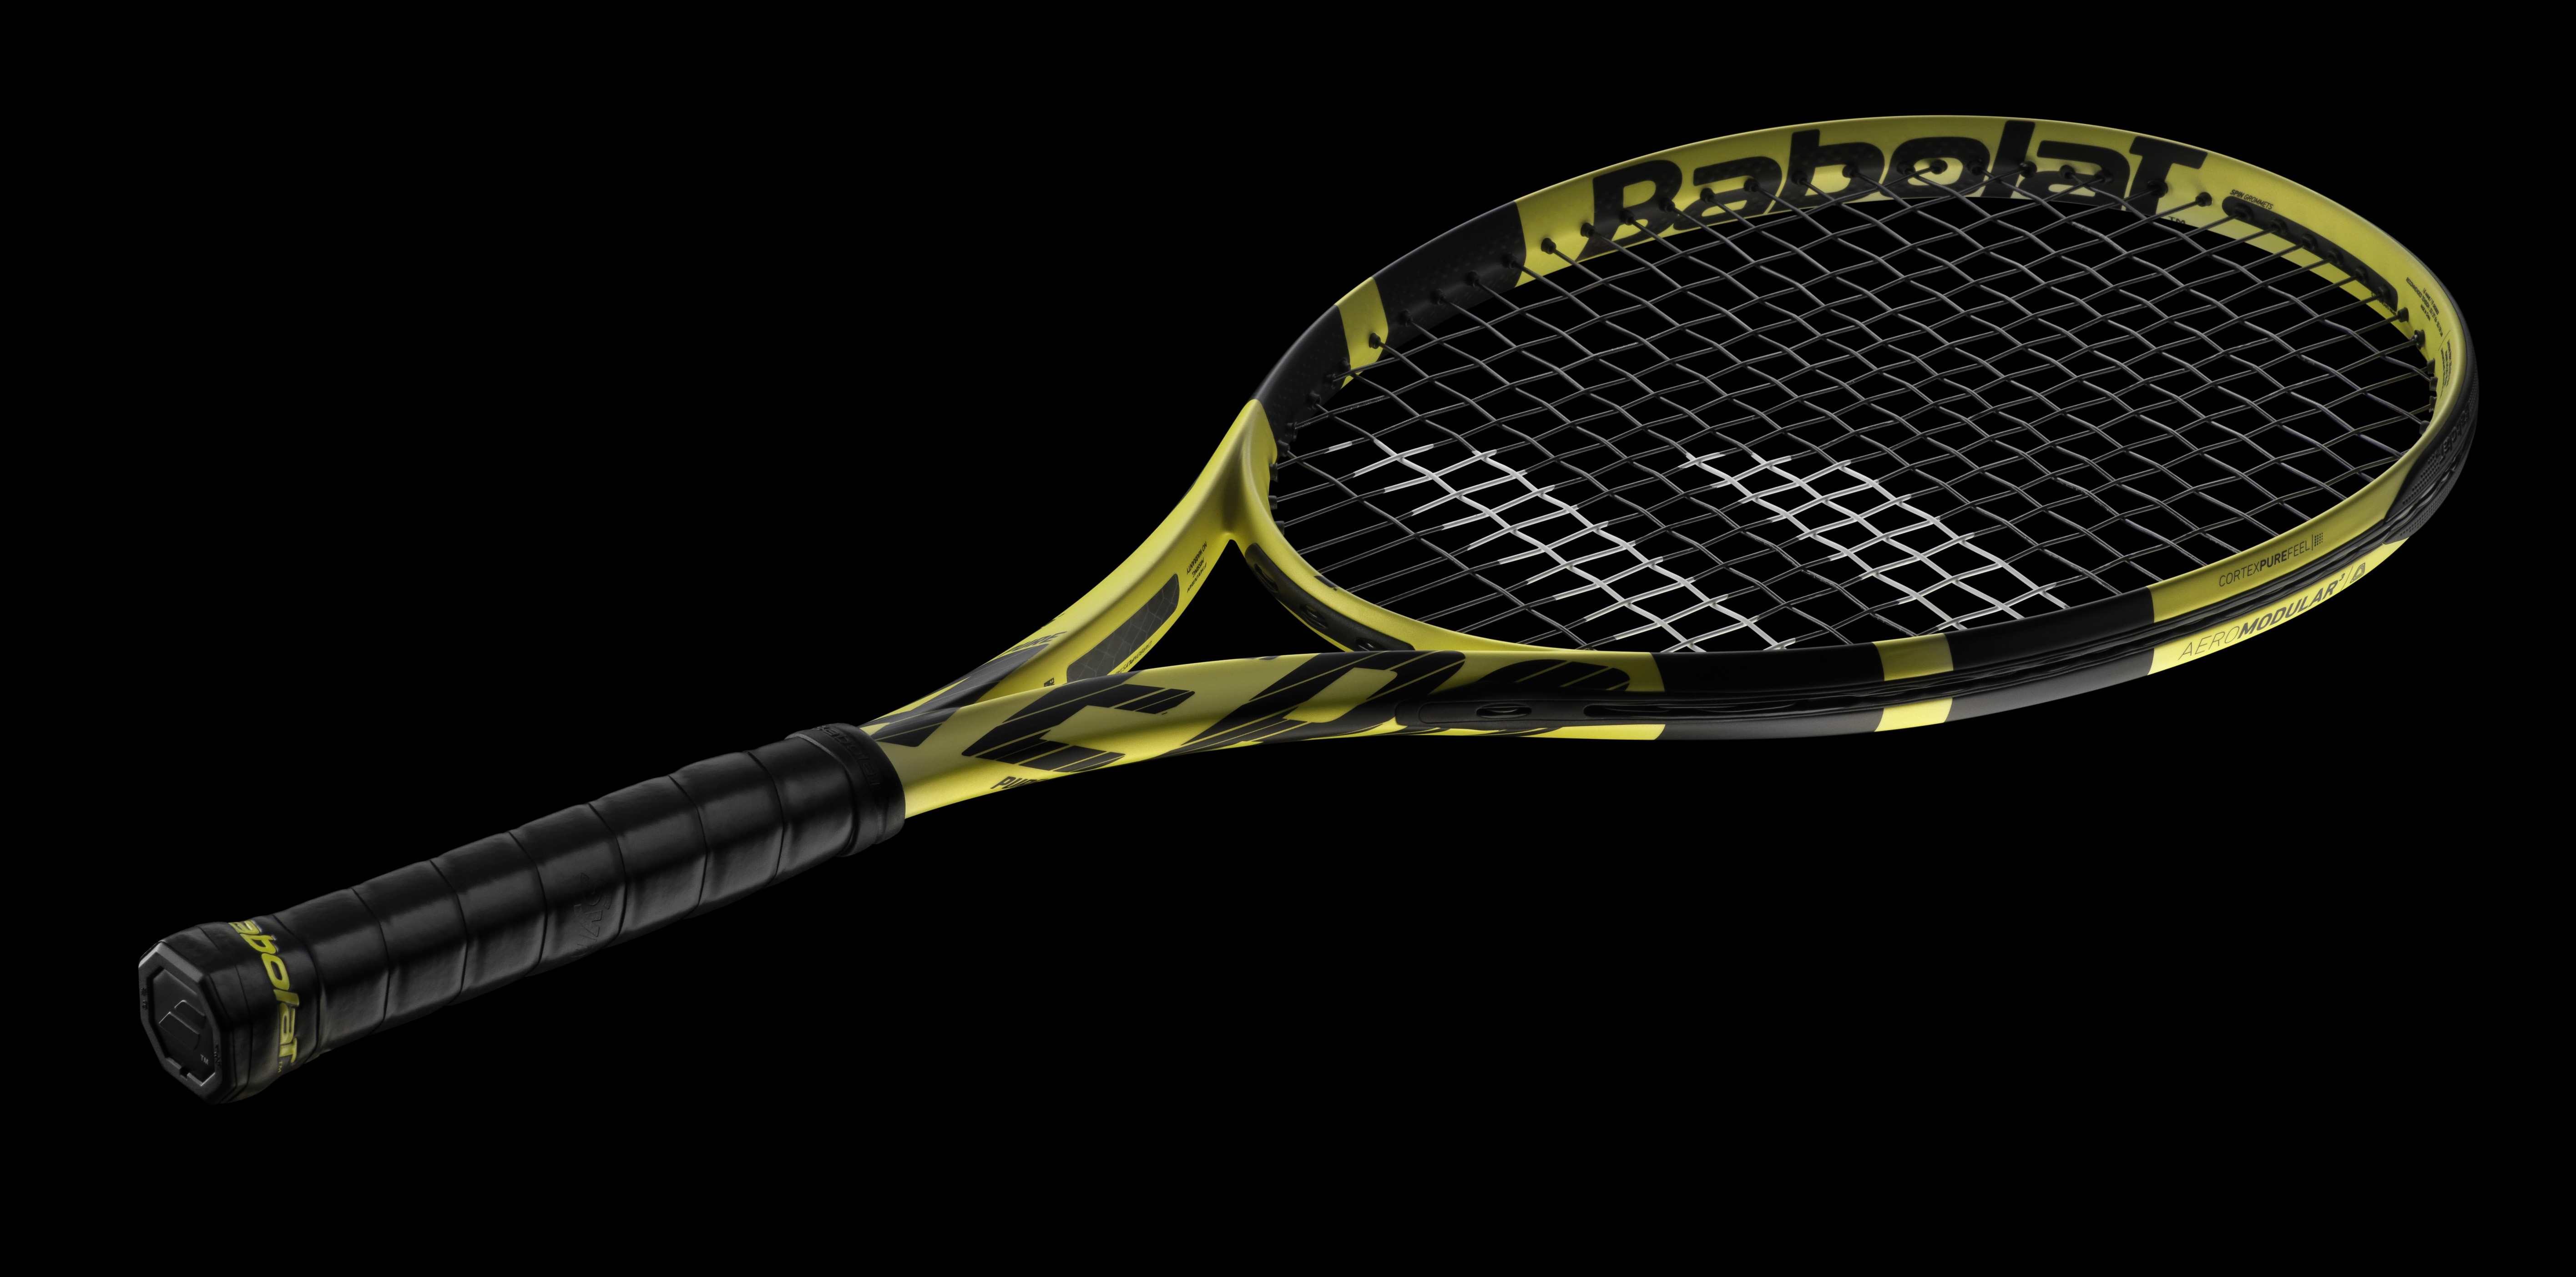 Chomarat has partnered with sports equipment company Babolat to supply multiaxial carbon to make a new tennis racket.